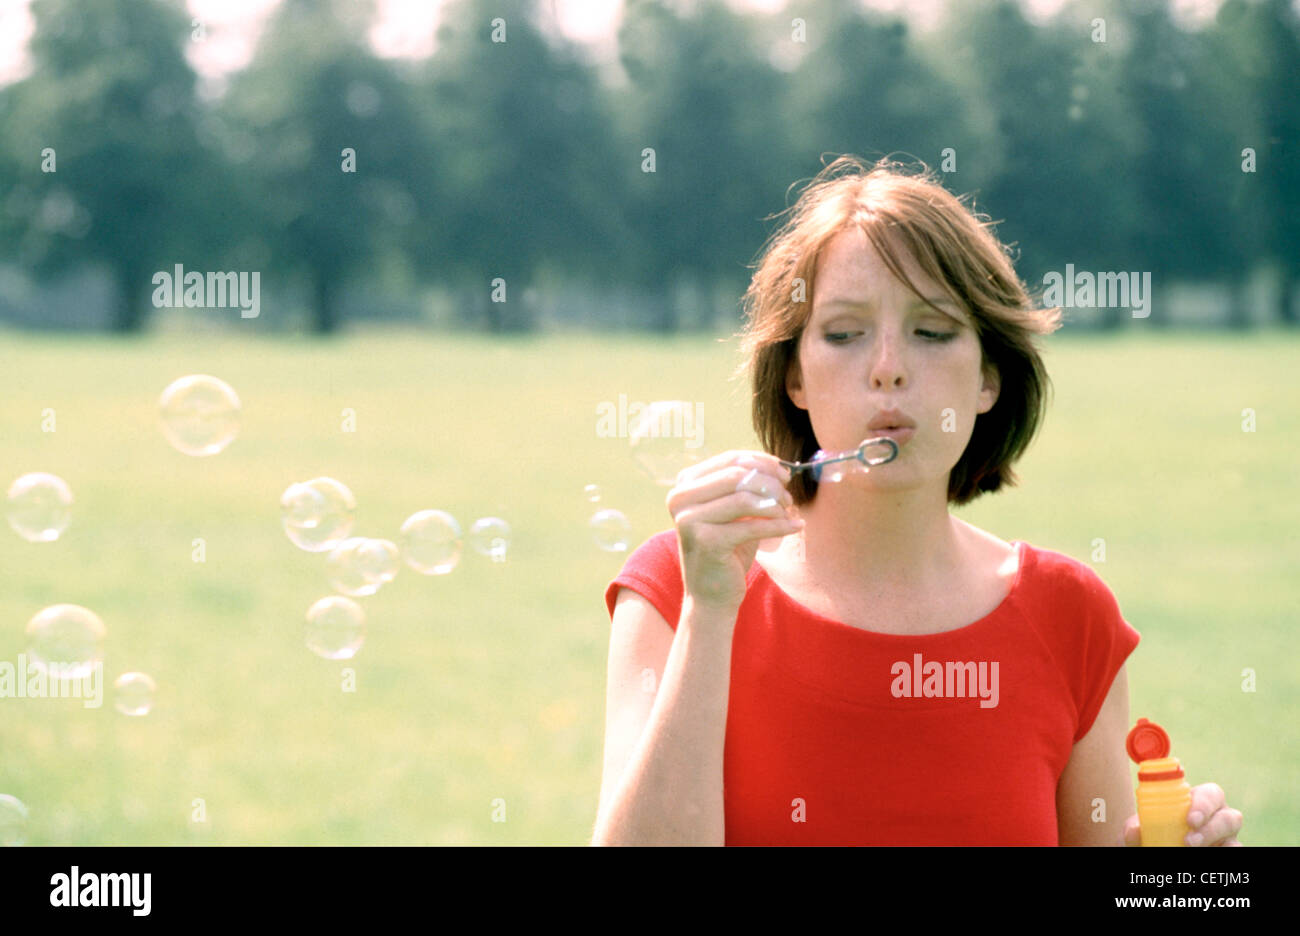 Female with short auburn hair wearing pink lipstick subtle eye make up and red top, blowing bubbles in park Stock Photo